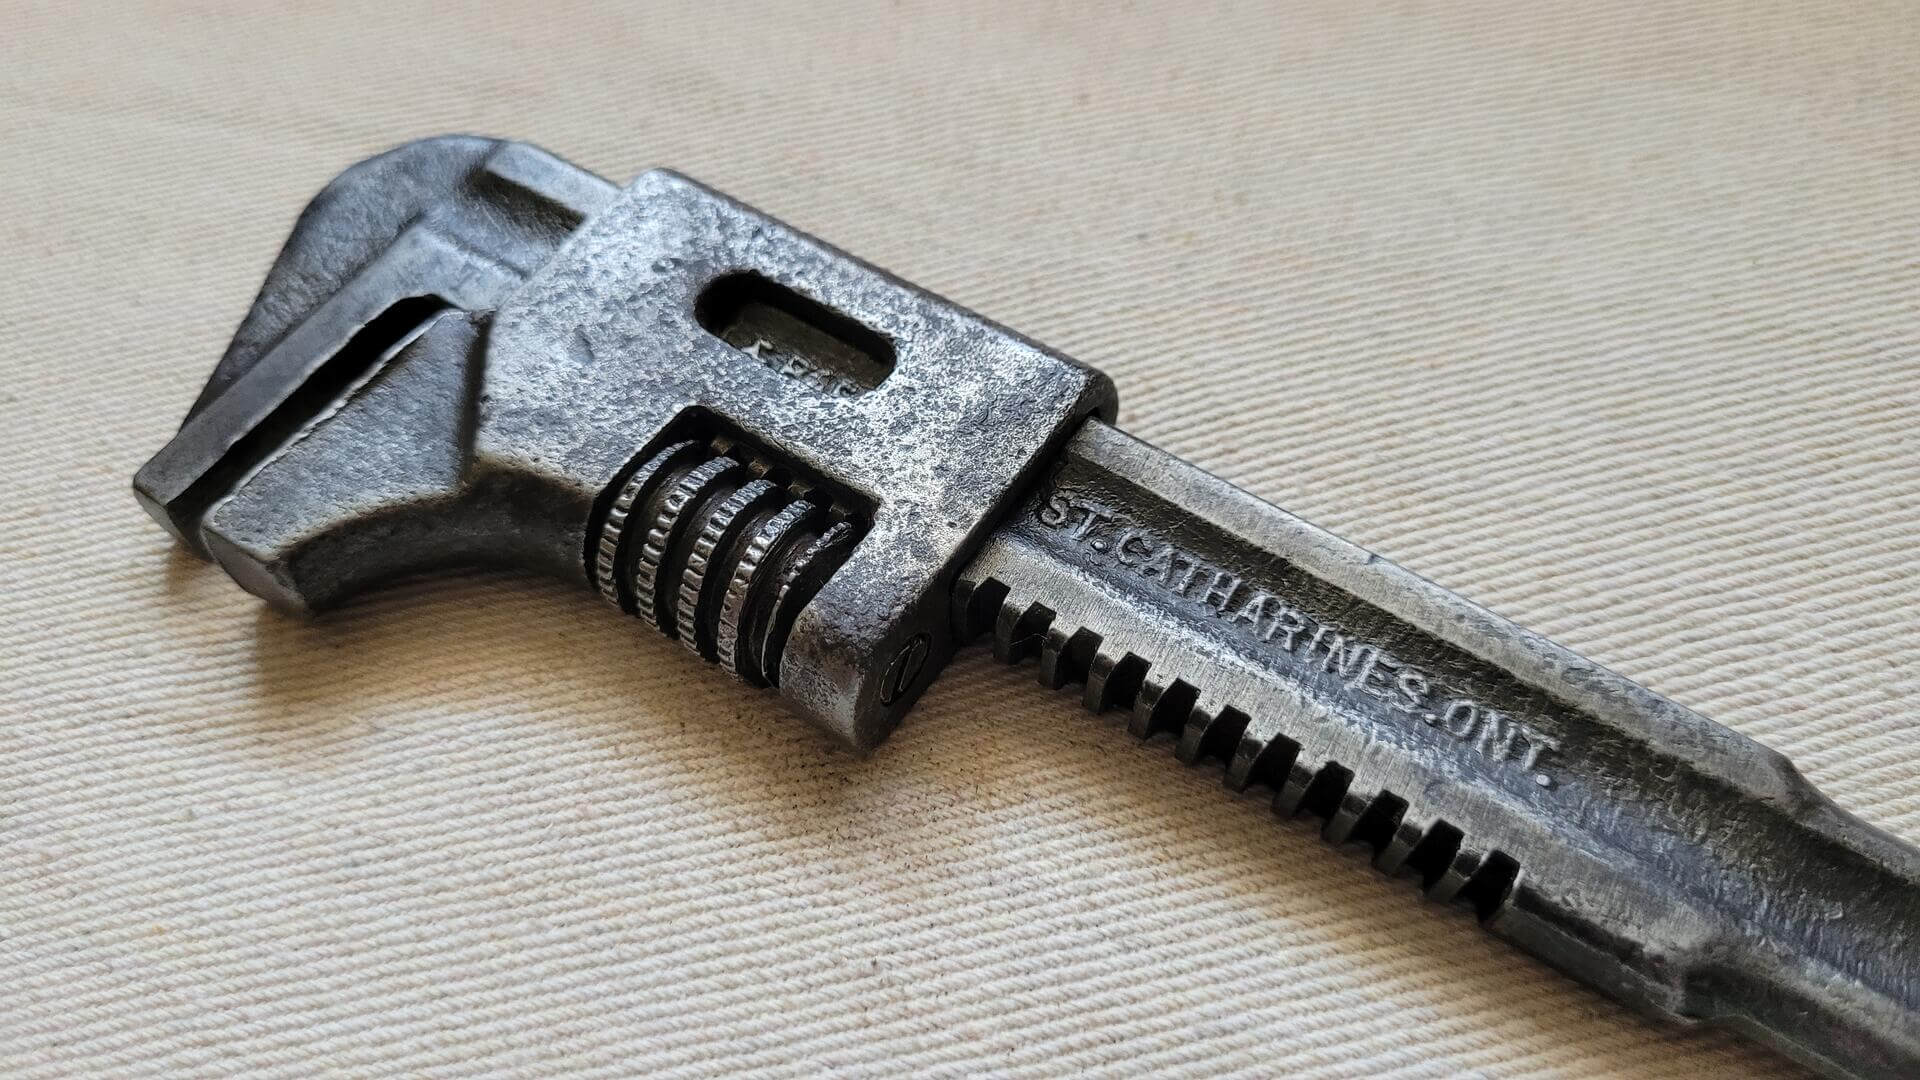 rare-vintage-whitman-and-barnes-manufacturing-company-adjustable-solid-cast-steel-wrench-st-catharines-ontario-w&b-diamond-made-in-canada-antique-hand-tool-collectible